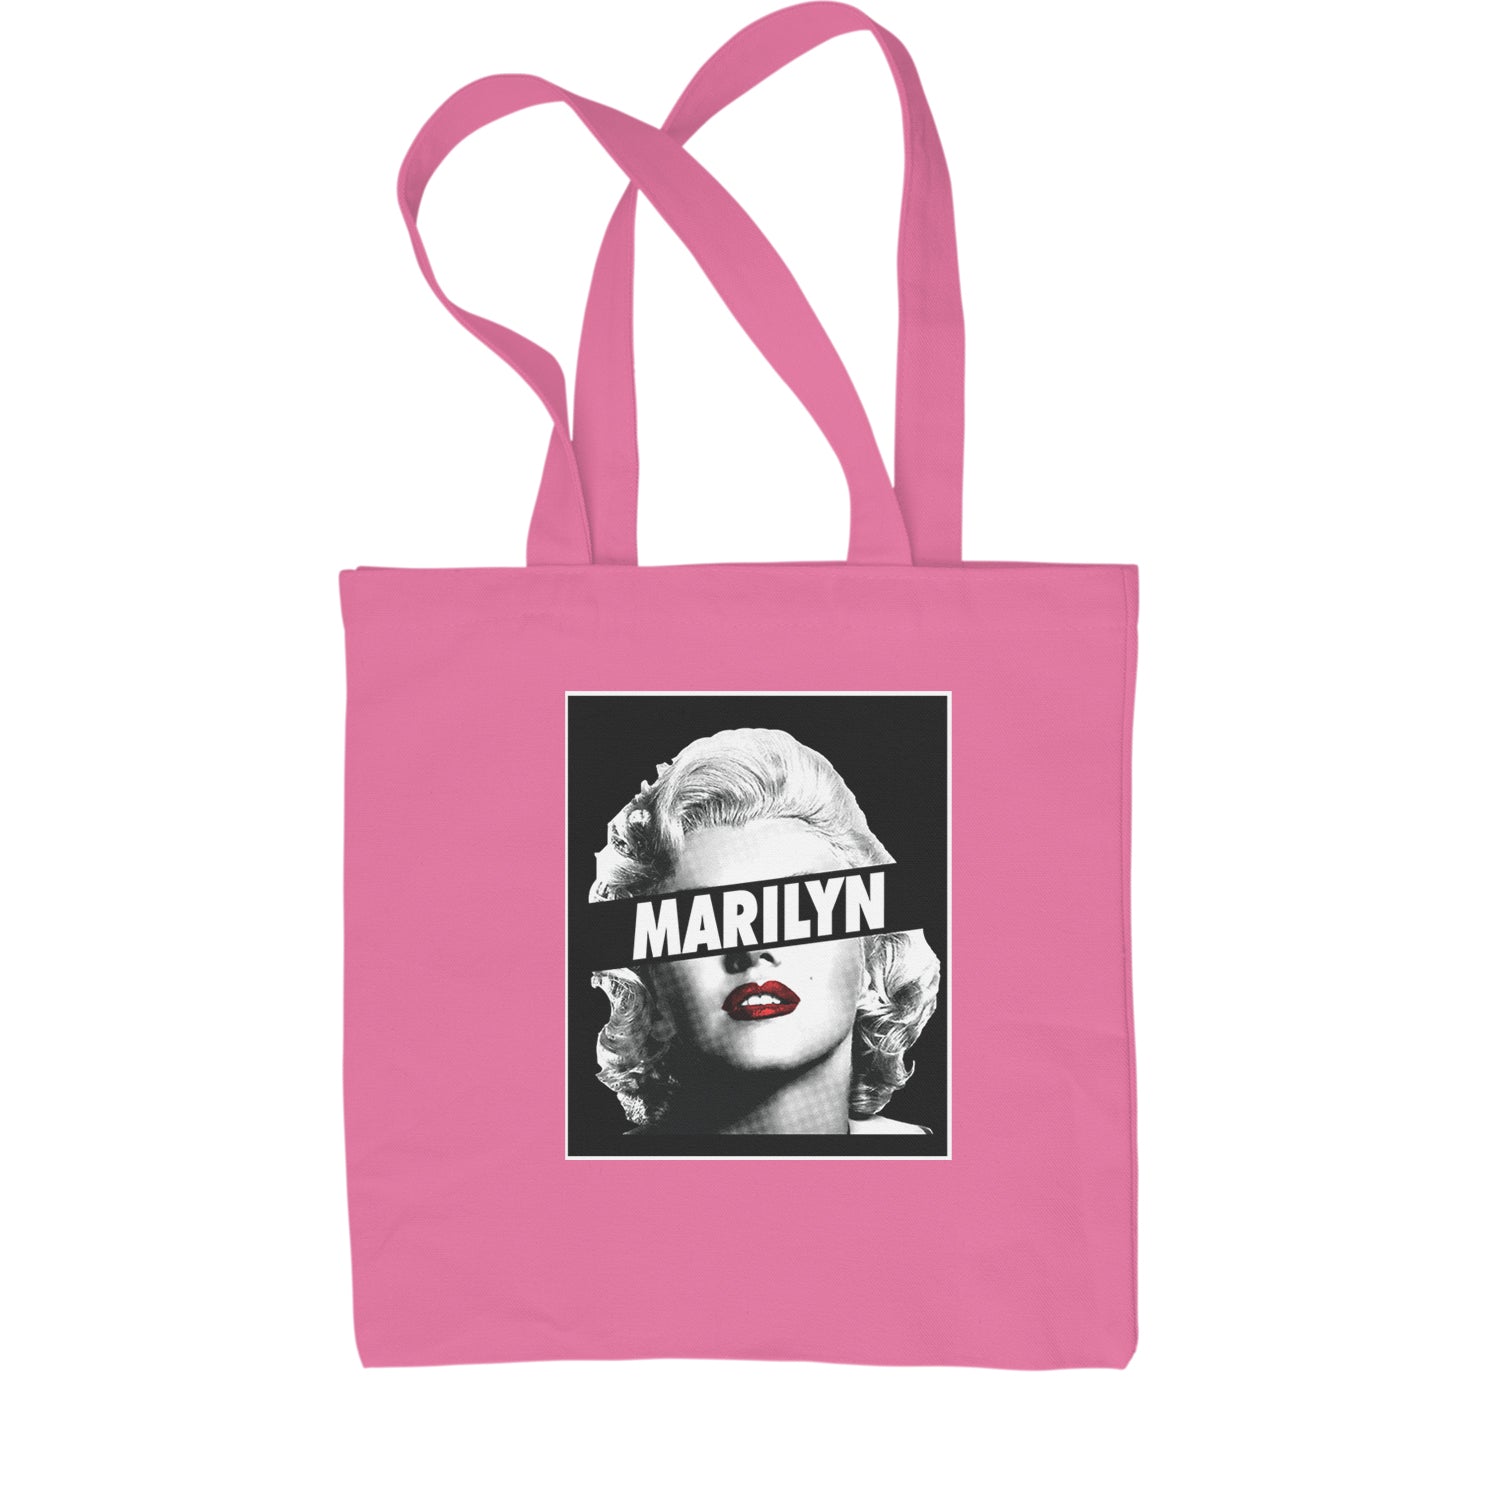 Marilyn Monroe Censored Shopping Tote Bag american, icon, marilyn, monroe by Expression Tees